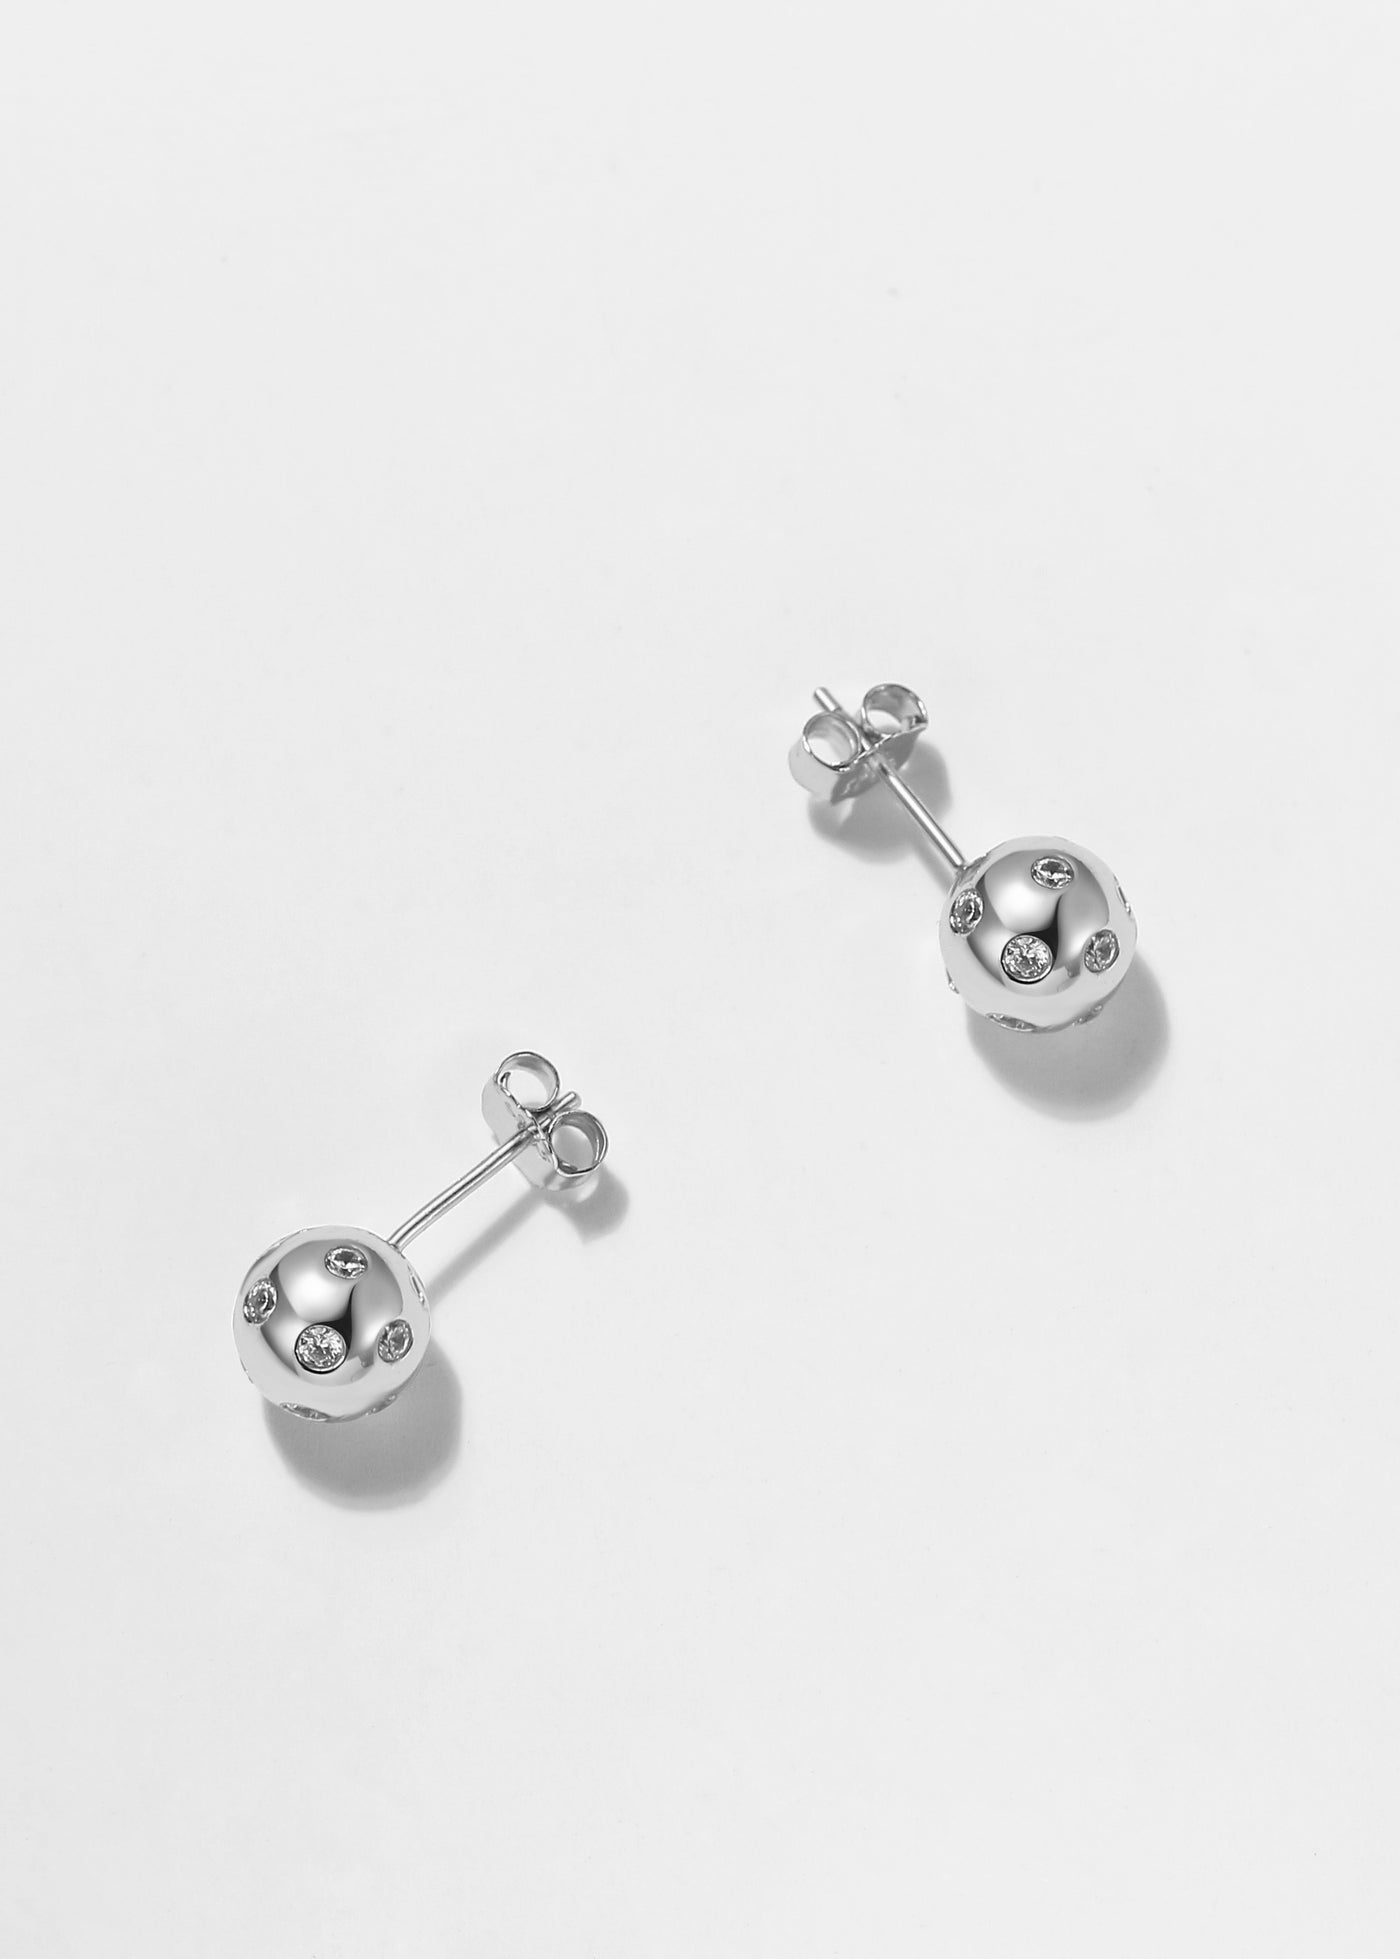 Silver. Pickleball Ball Stud Bling Earrings.Made from sterling silver with a protective rhodium plating. 8mm diameter.